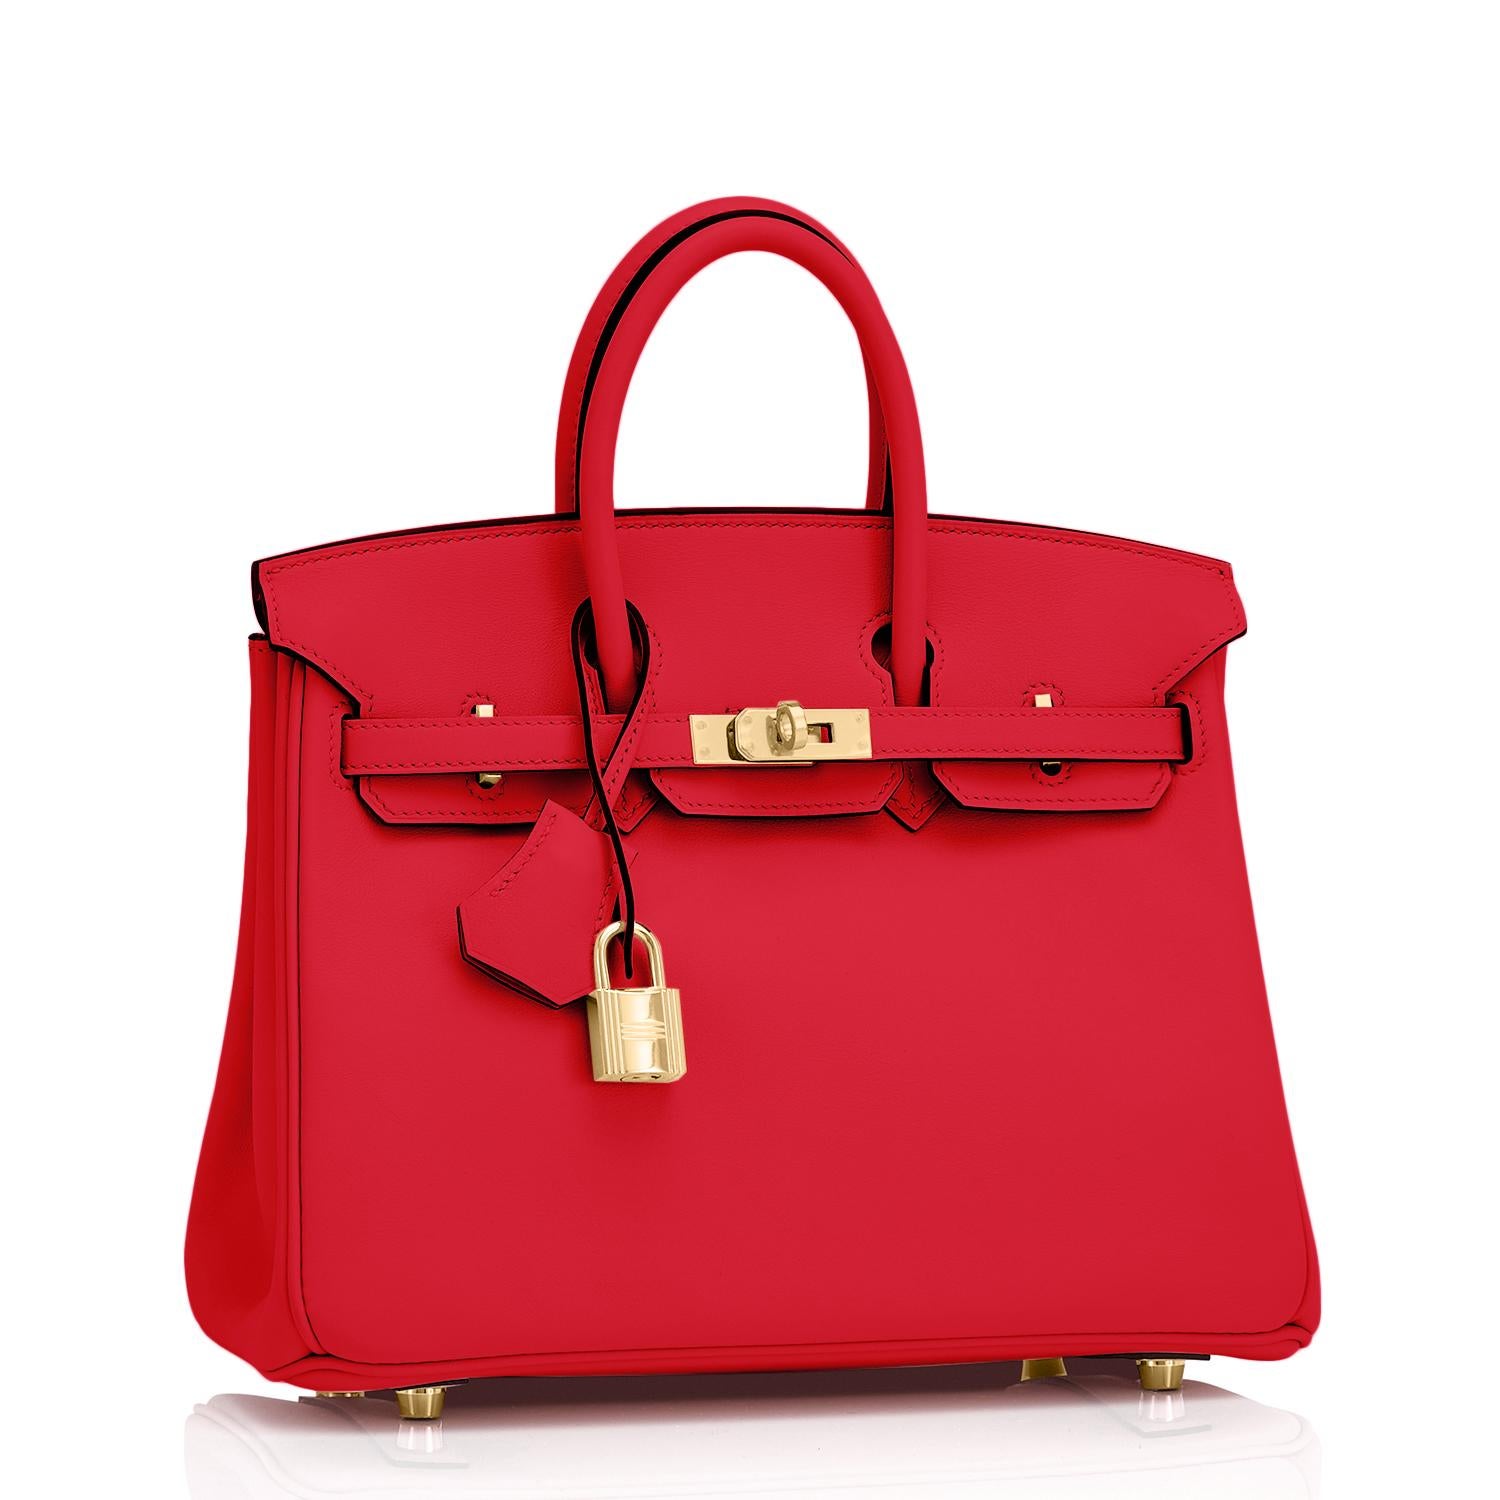 Hermes Birkin 25 Rouge de Coeur Lipstick Red Bag Gold Jewel Y Stamp, 2020
Just purchased from Hermes store; bag bears new interior 2020 Y Stamp.
Brand New in Box. Store fresh. Pristine Condition (with plastic on hardware)
Perfect gift! Comes with